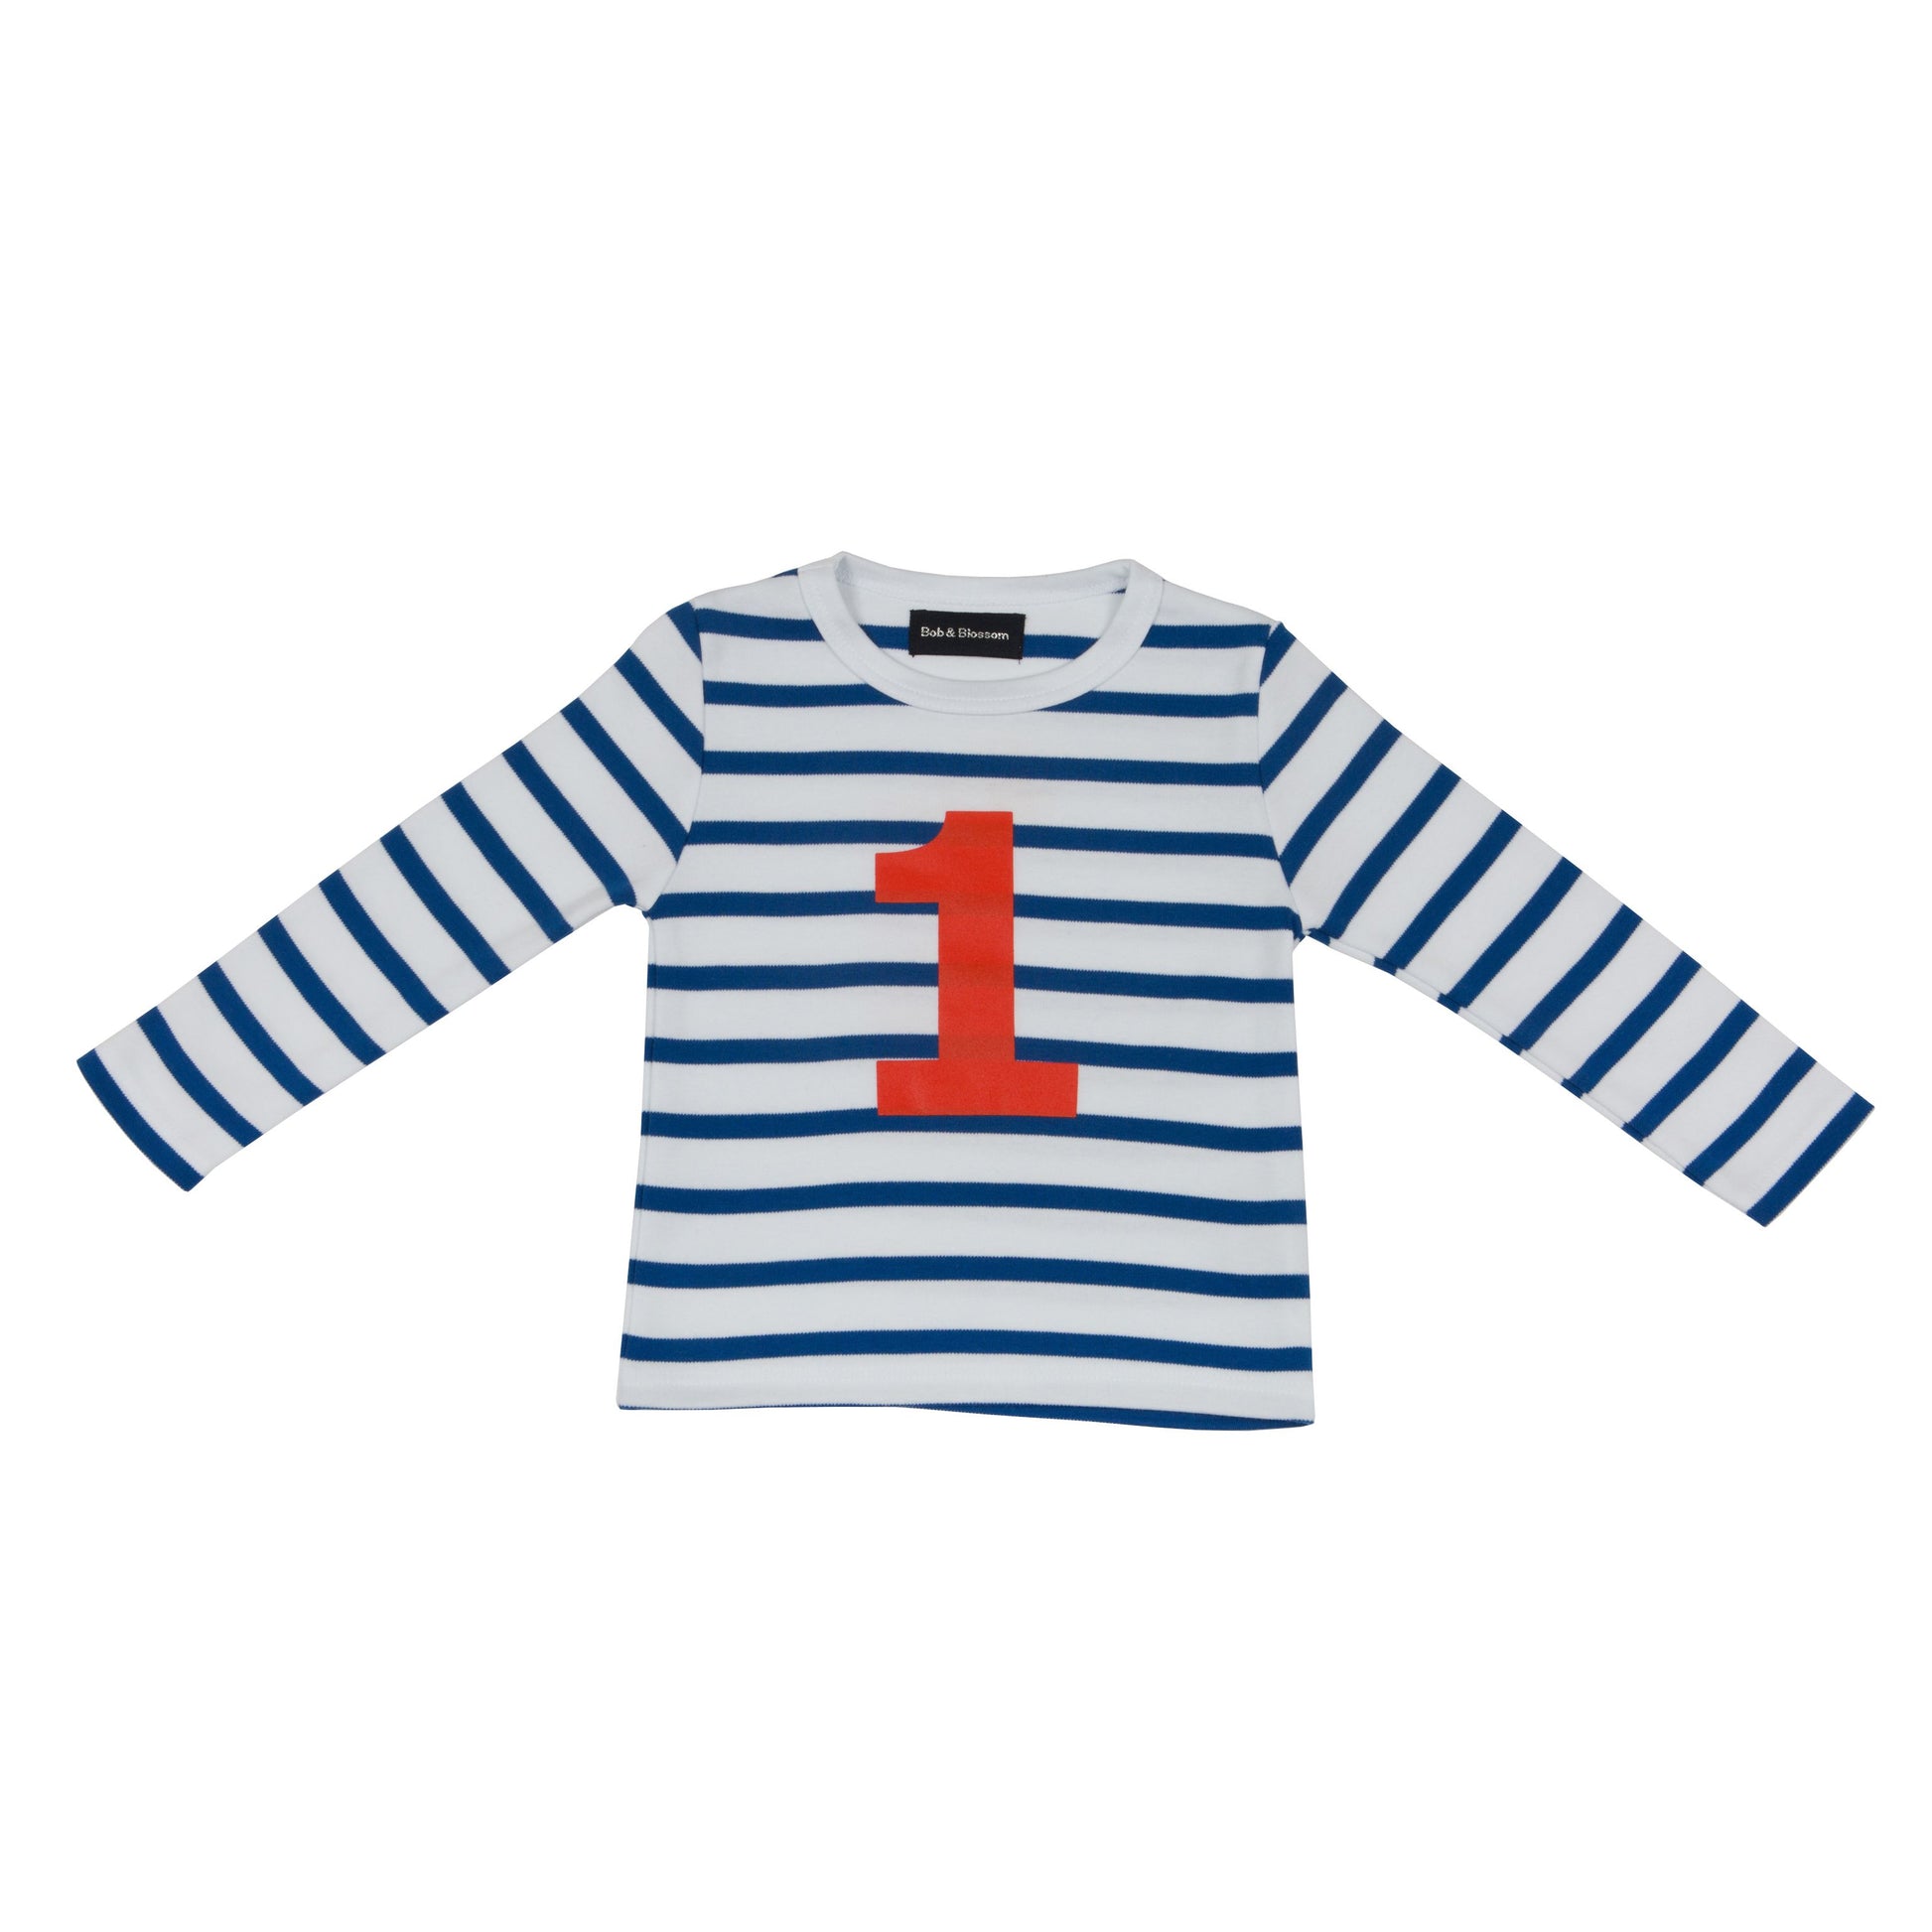 french blue and white striped t shirt with bright red number 1 on the front